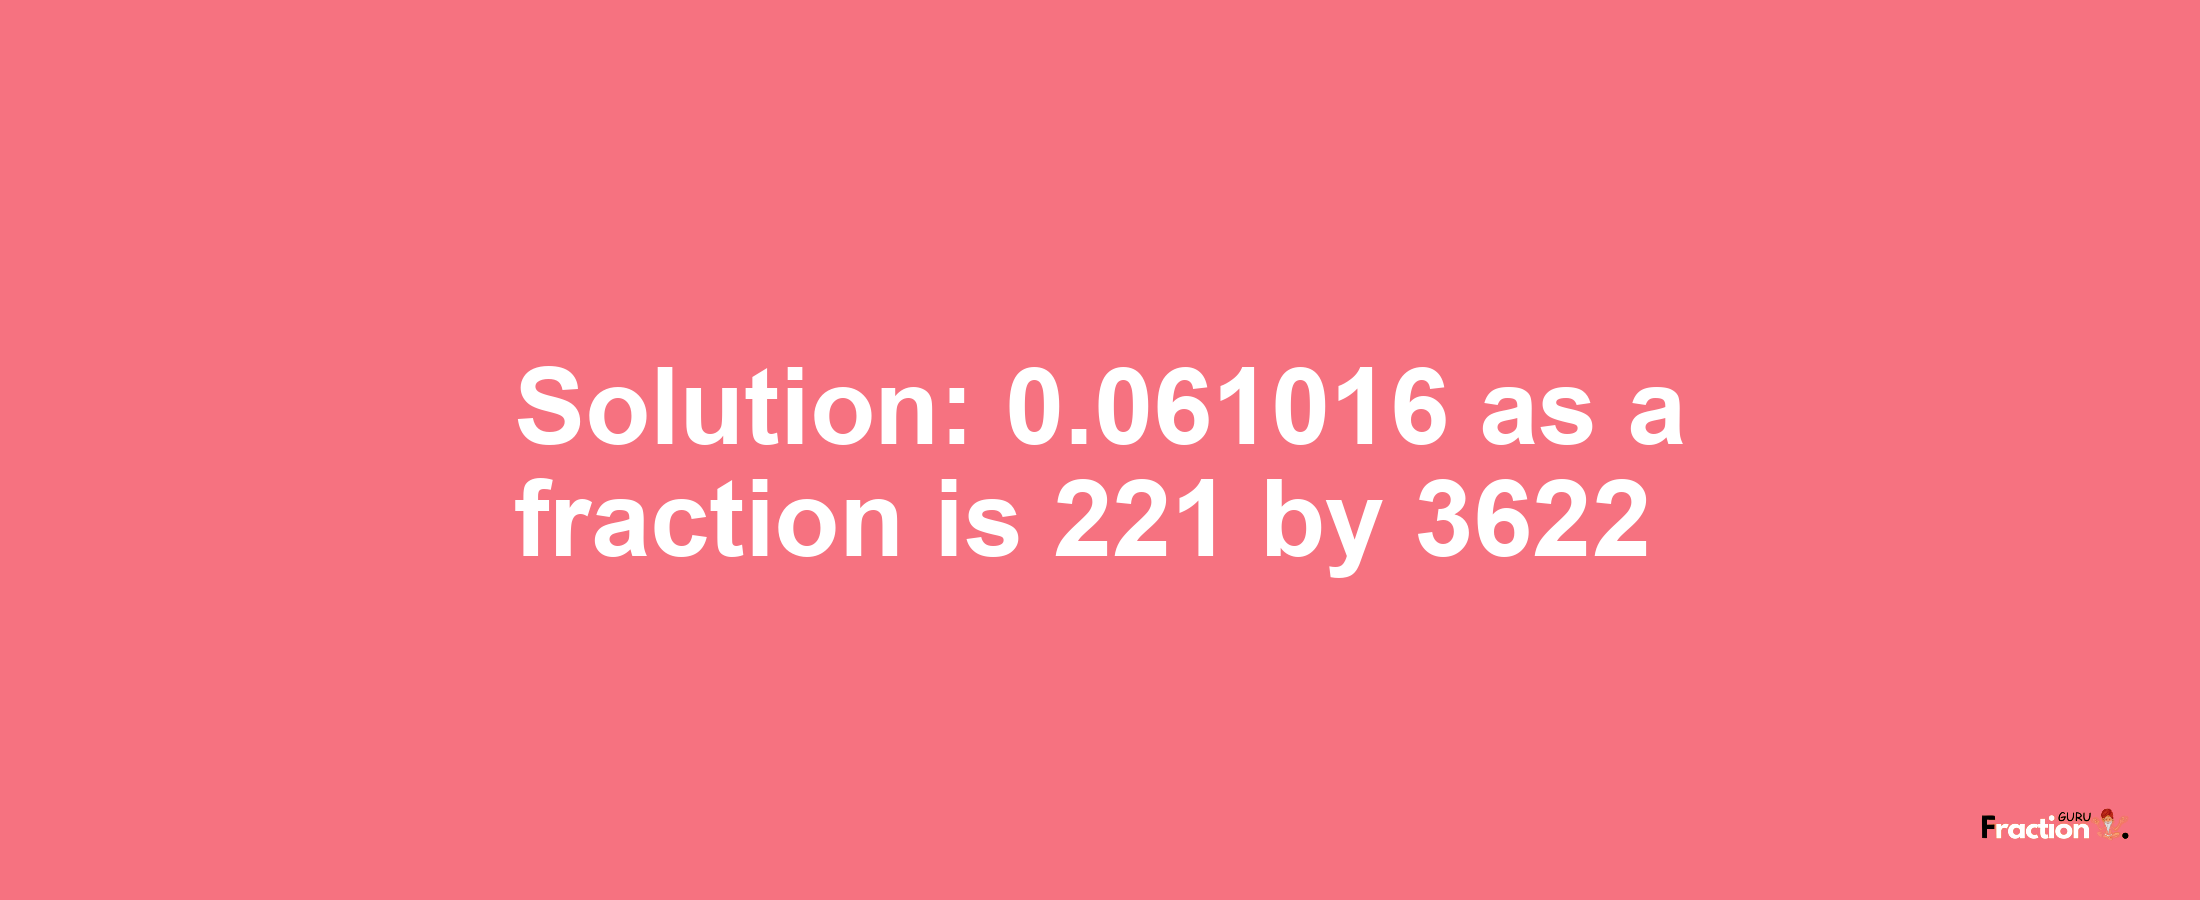 Solution:0.061016 as a fraction is 221/3622